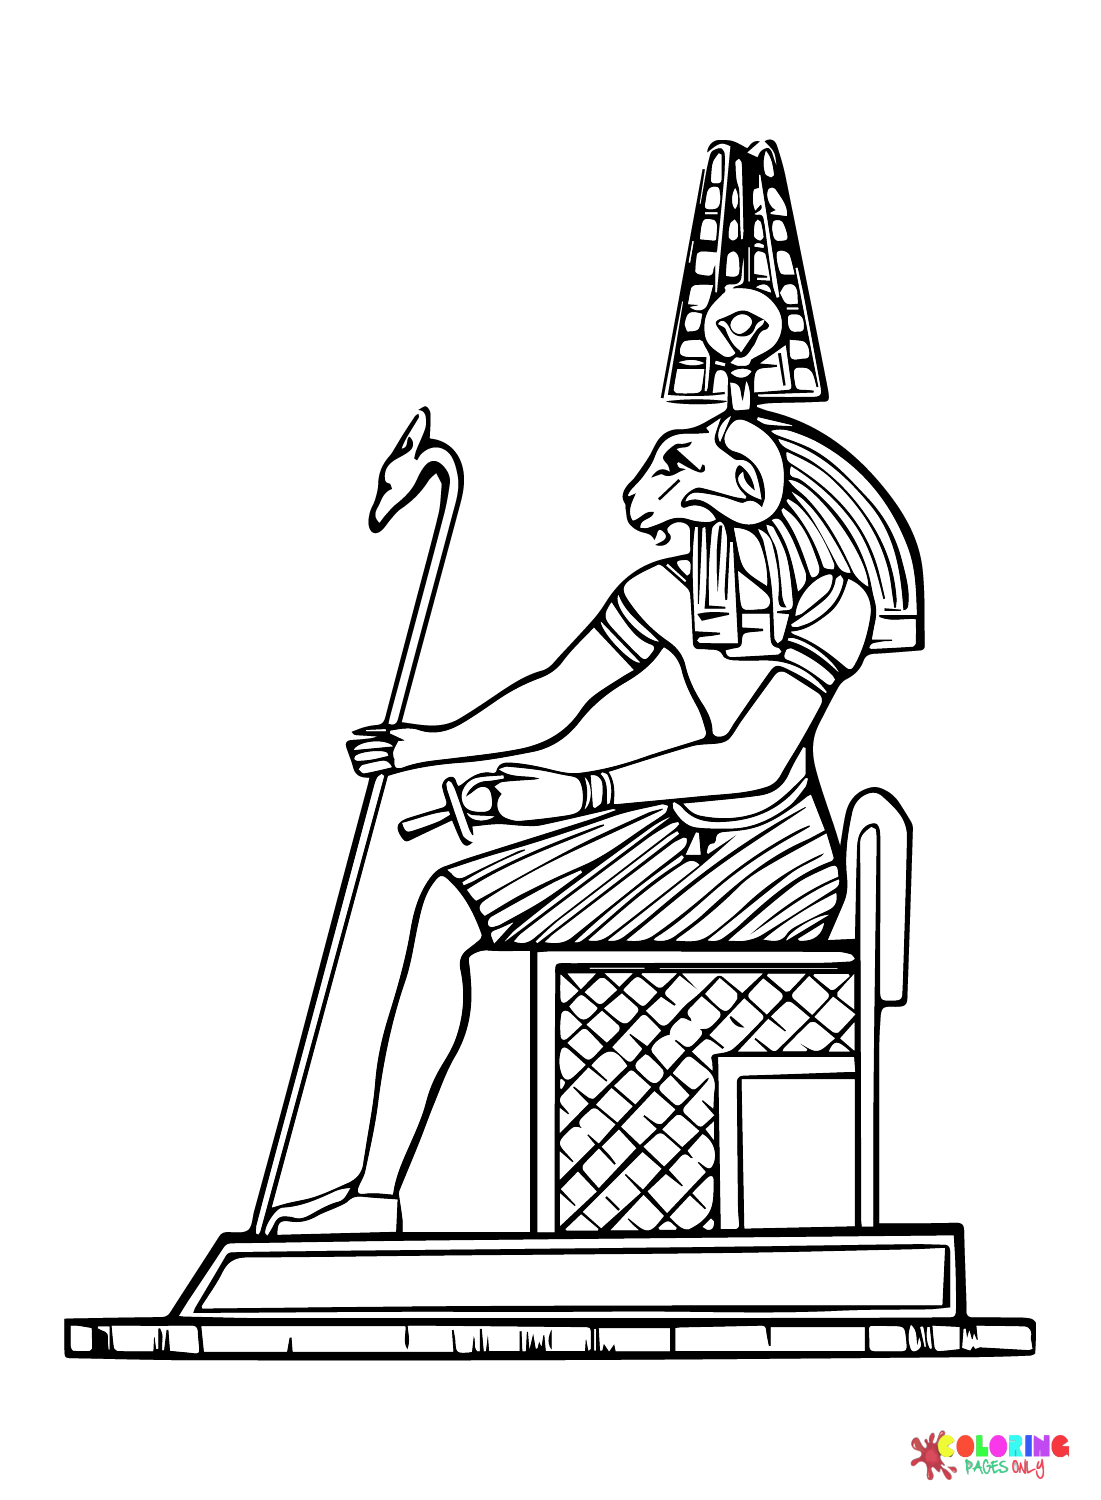 King Ancient Egypt Coloring Page